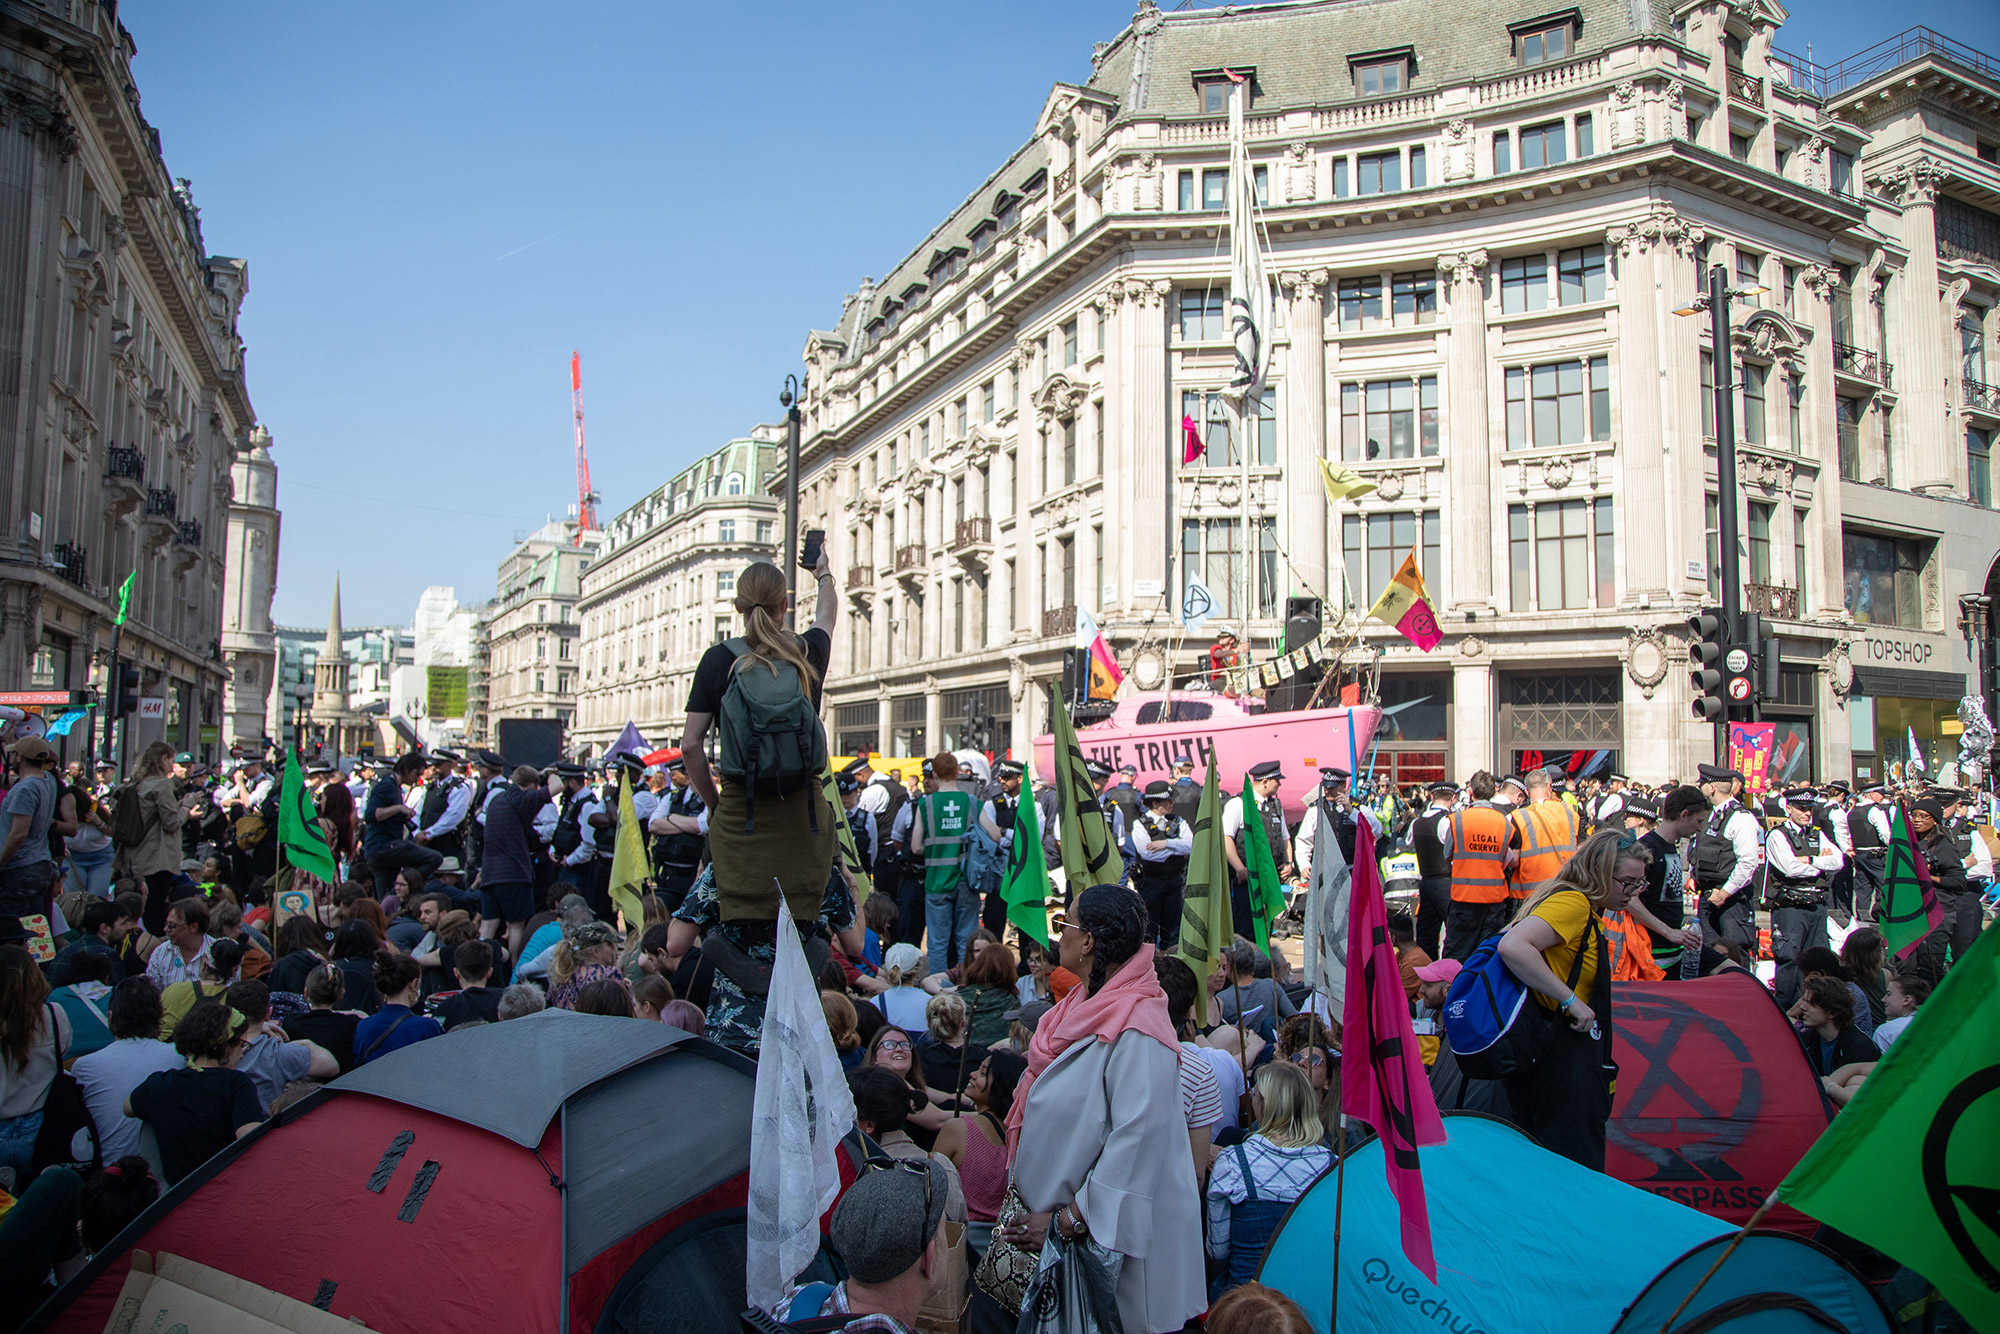 Extinction Rebellion in Oxford Circus. Source: Jwslubbock (Wikimedia Commons CC BY-SA)